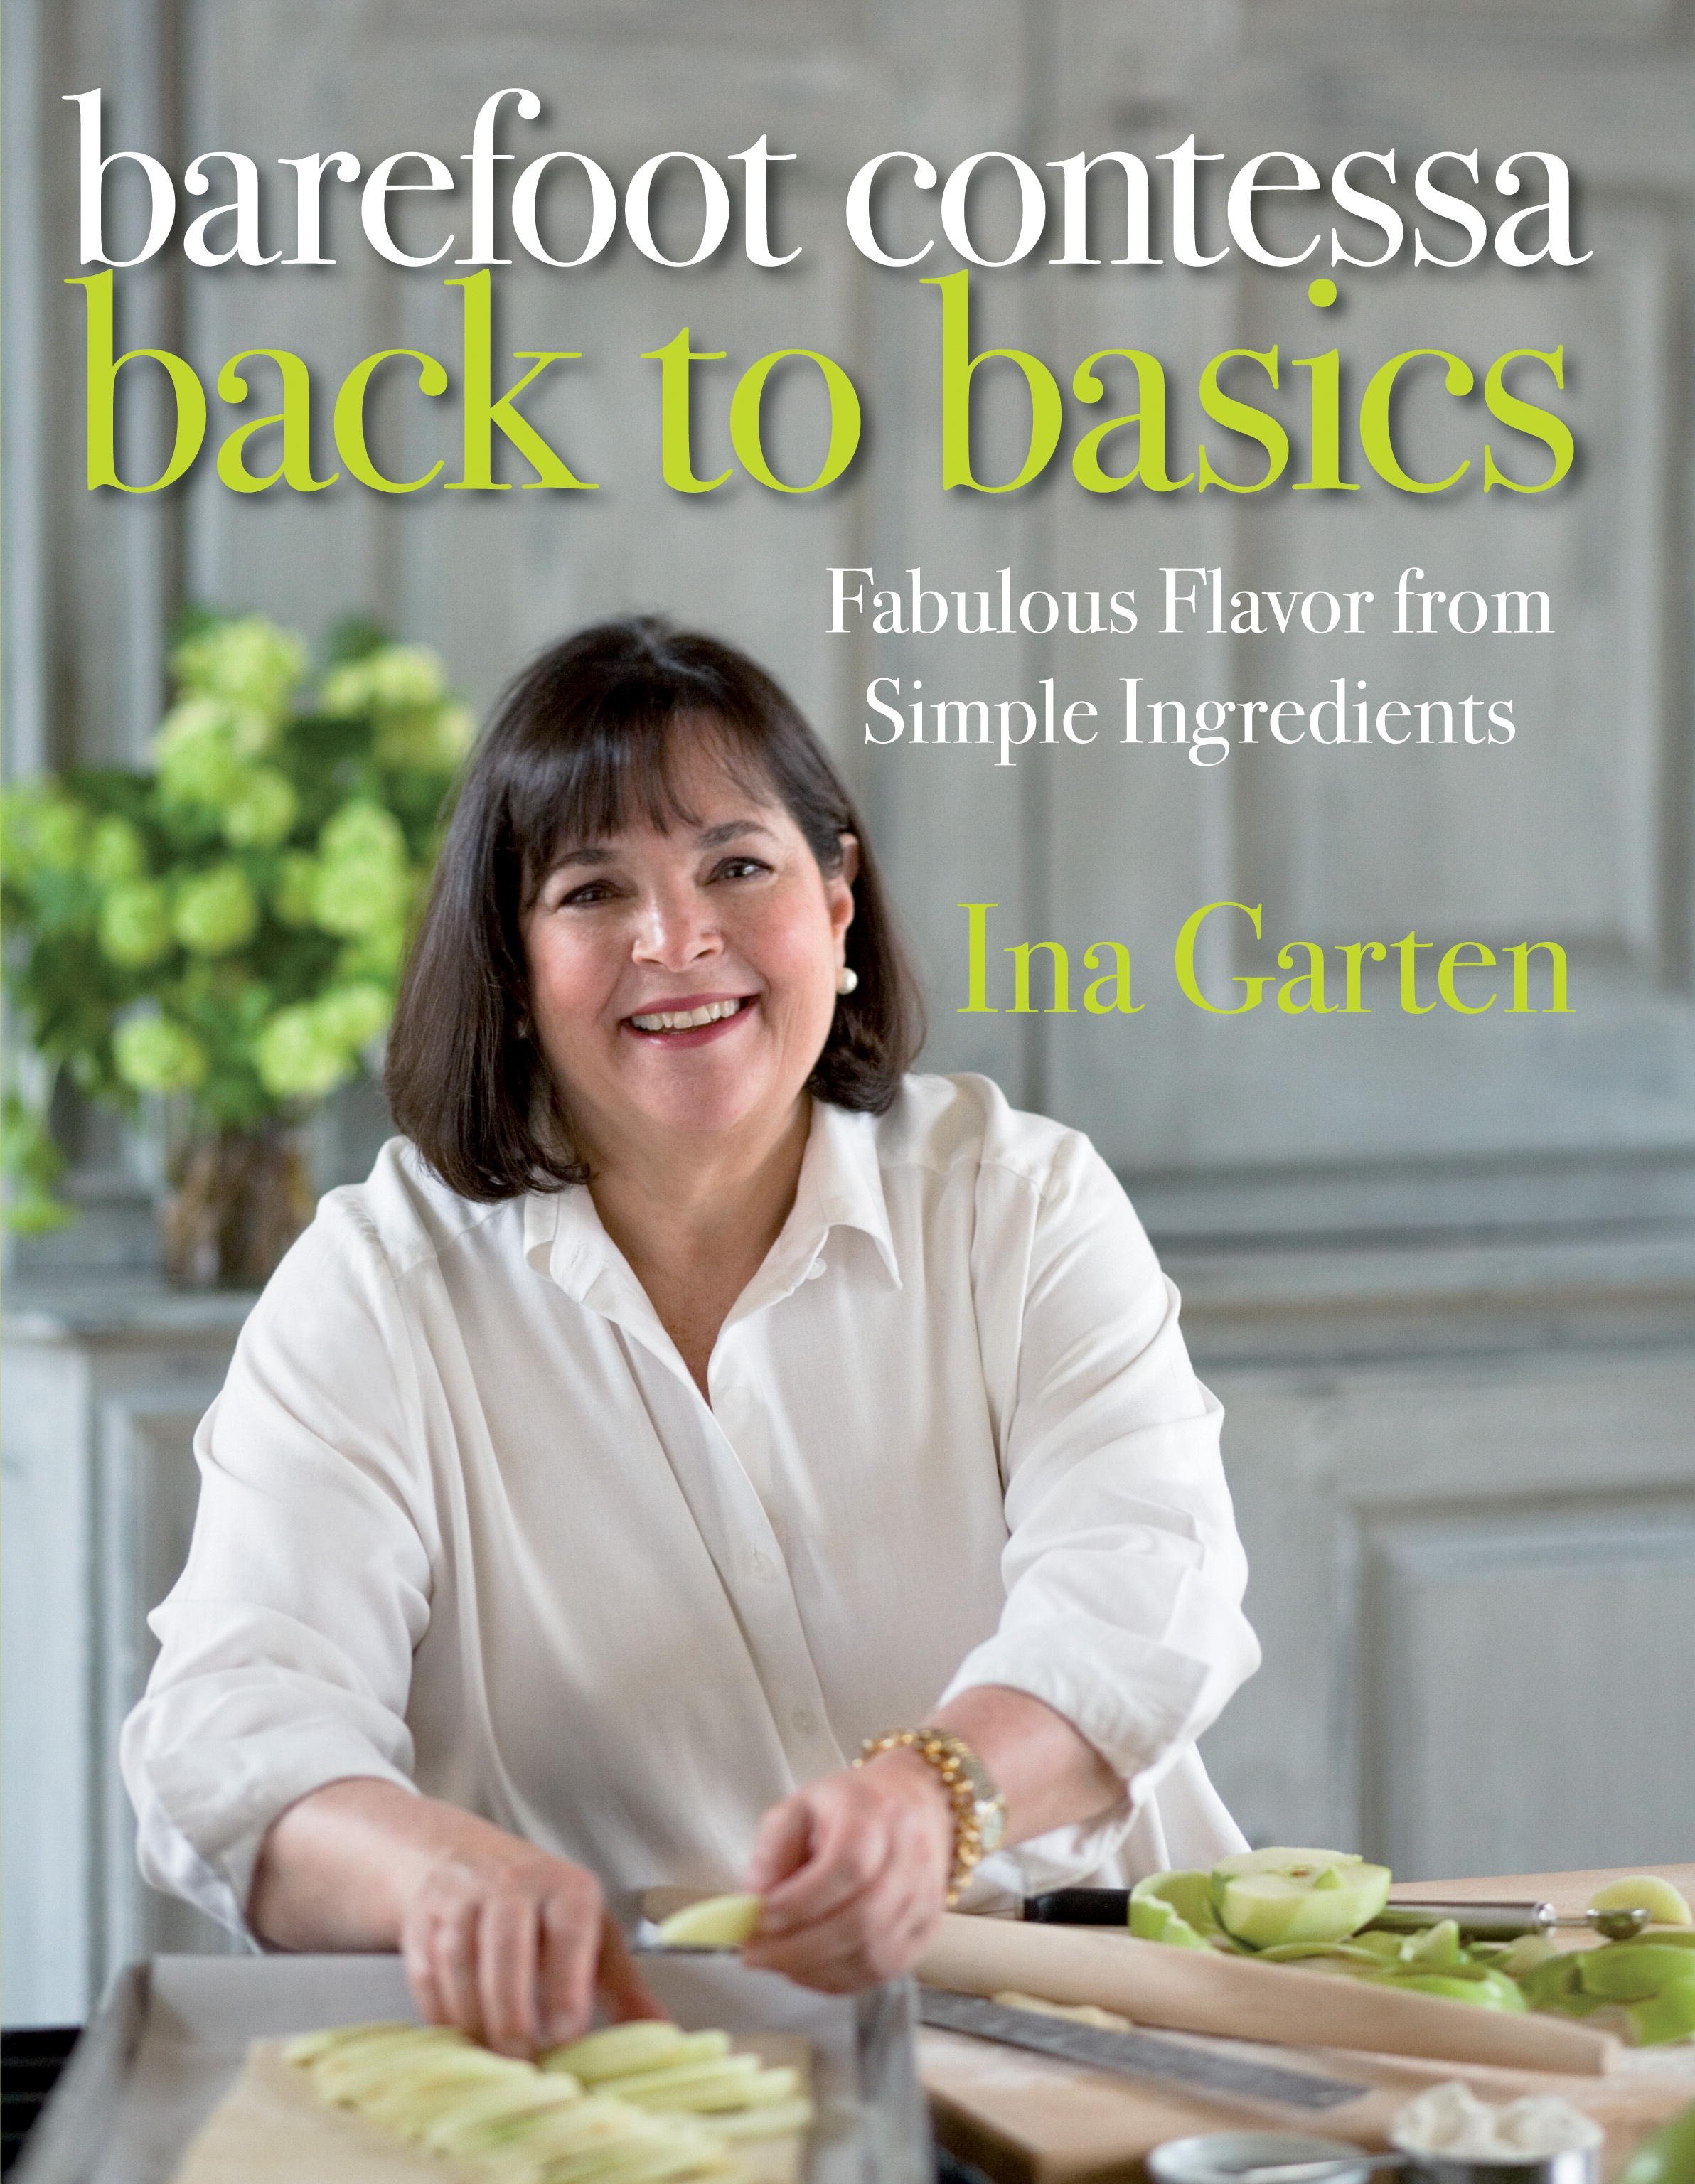 Barefoot Contessa back to basics fabulous flavor from simple ingredients cover image